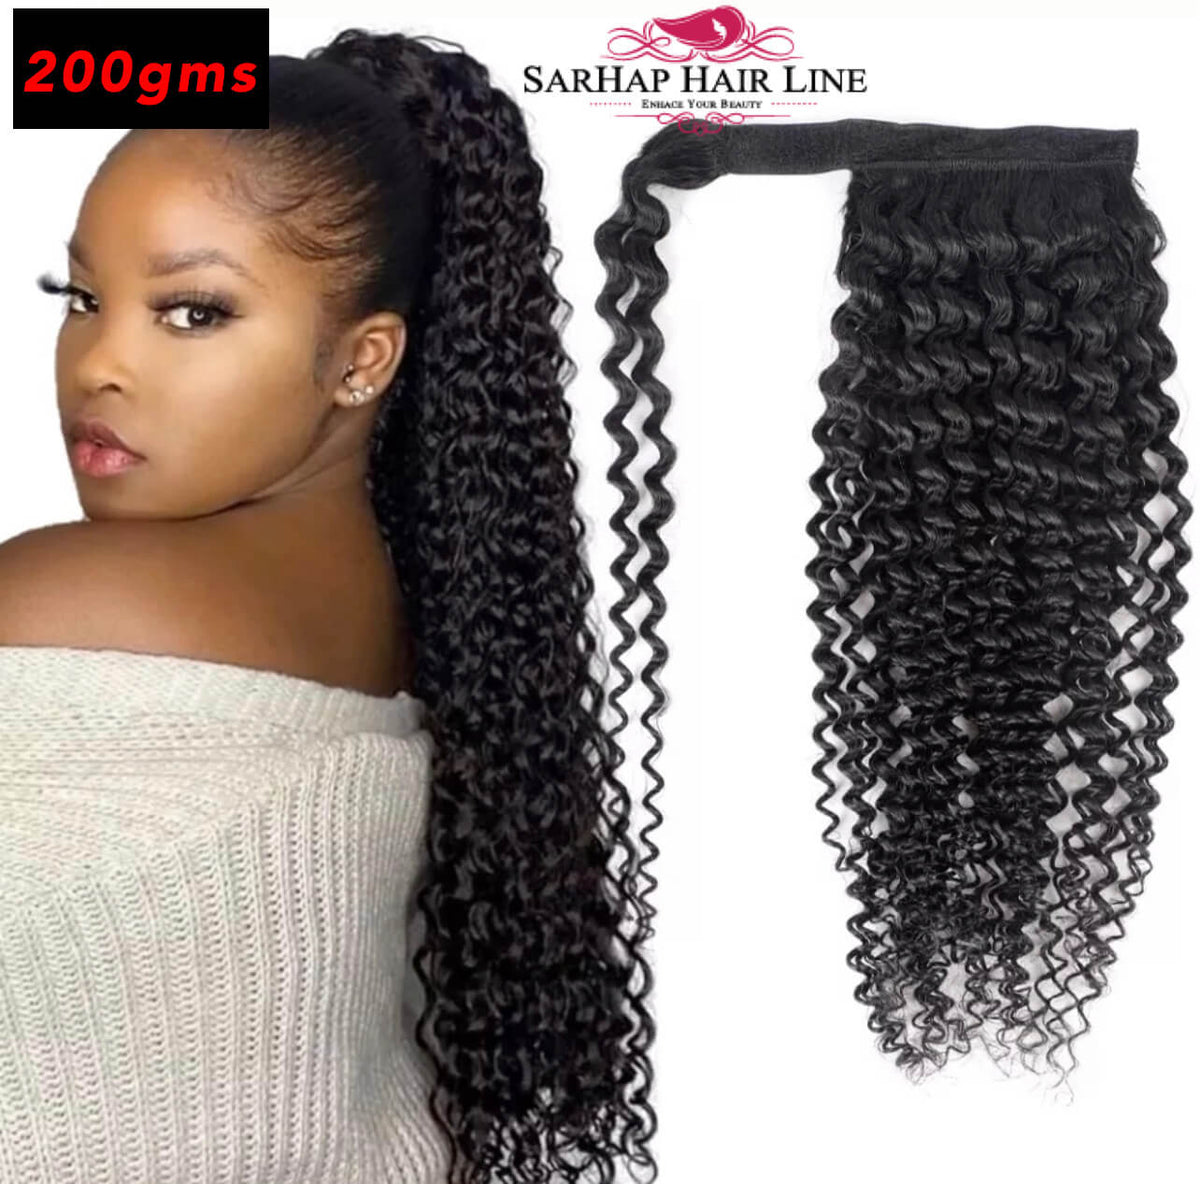 Ponytail Curly Extension Human Hair